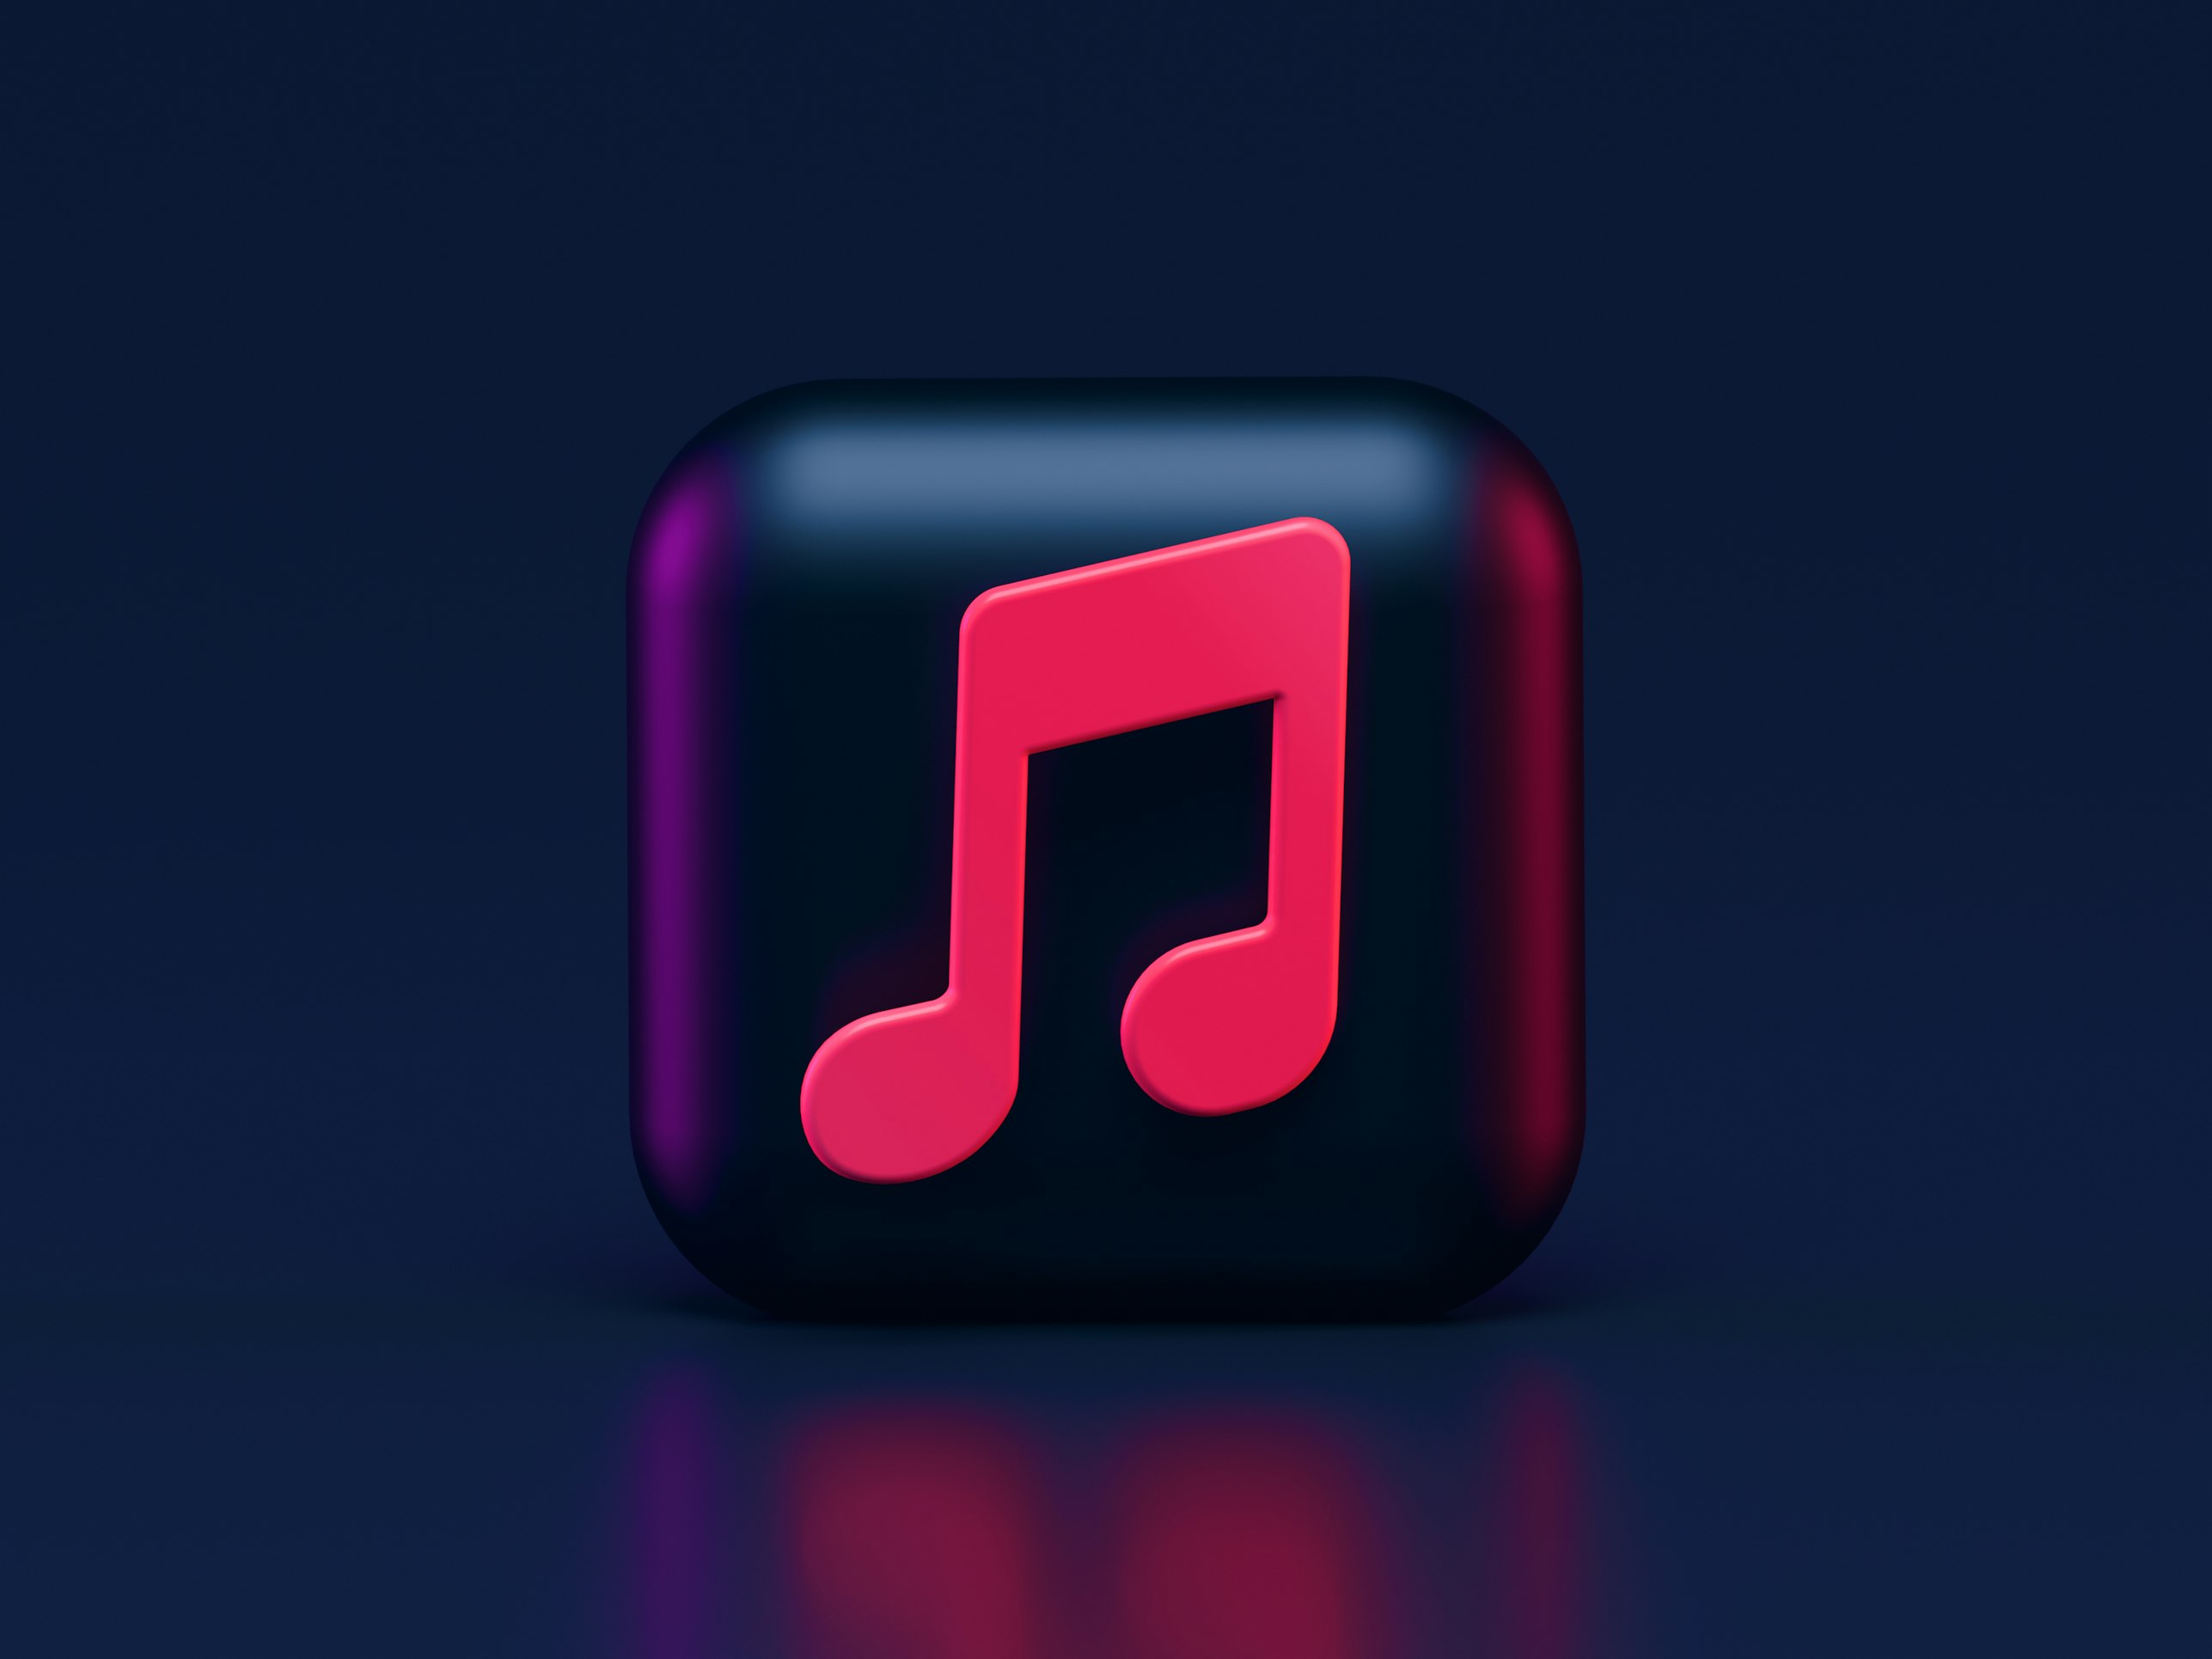 Developing a Lightweight TUI Music Player in C# using Terminal.Gui (Part One)